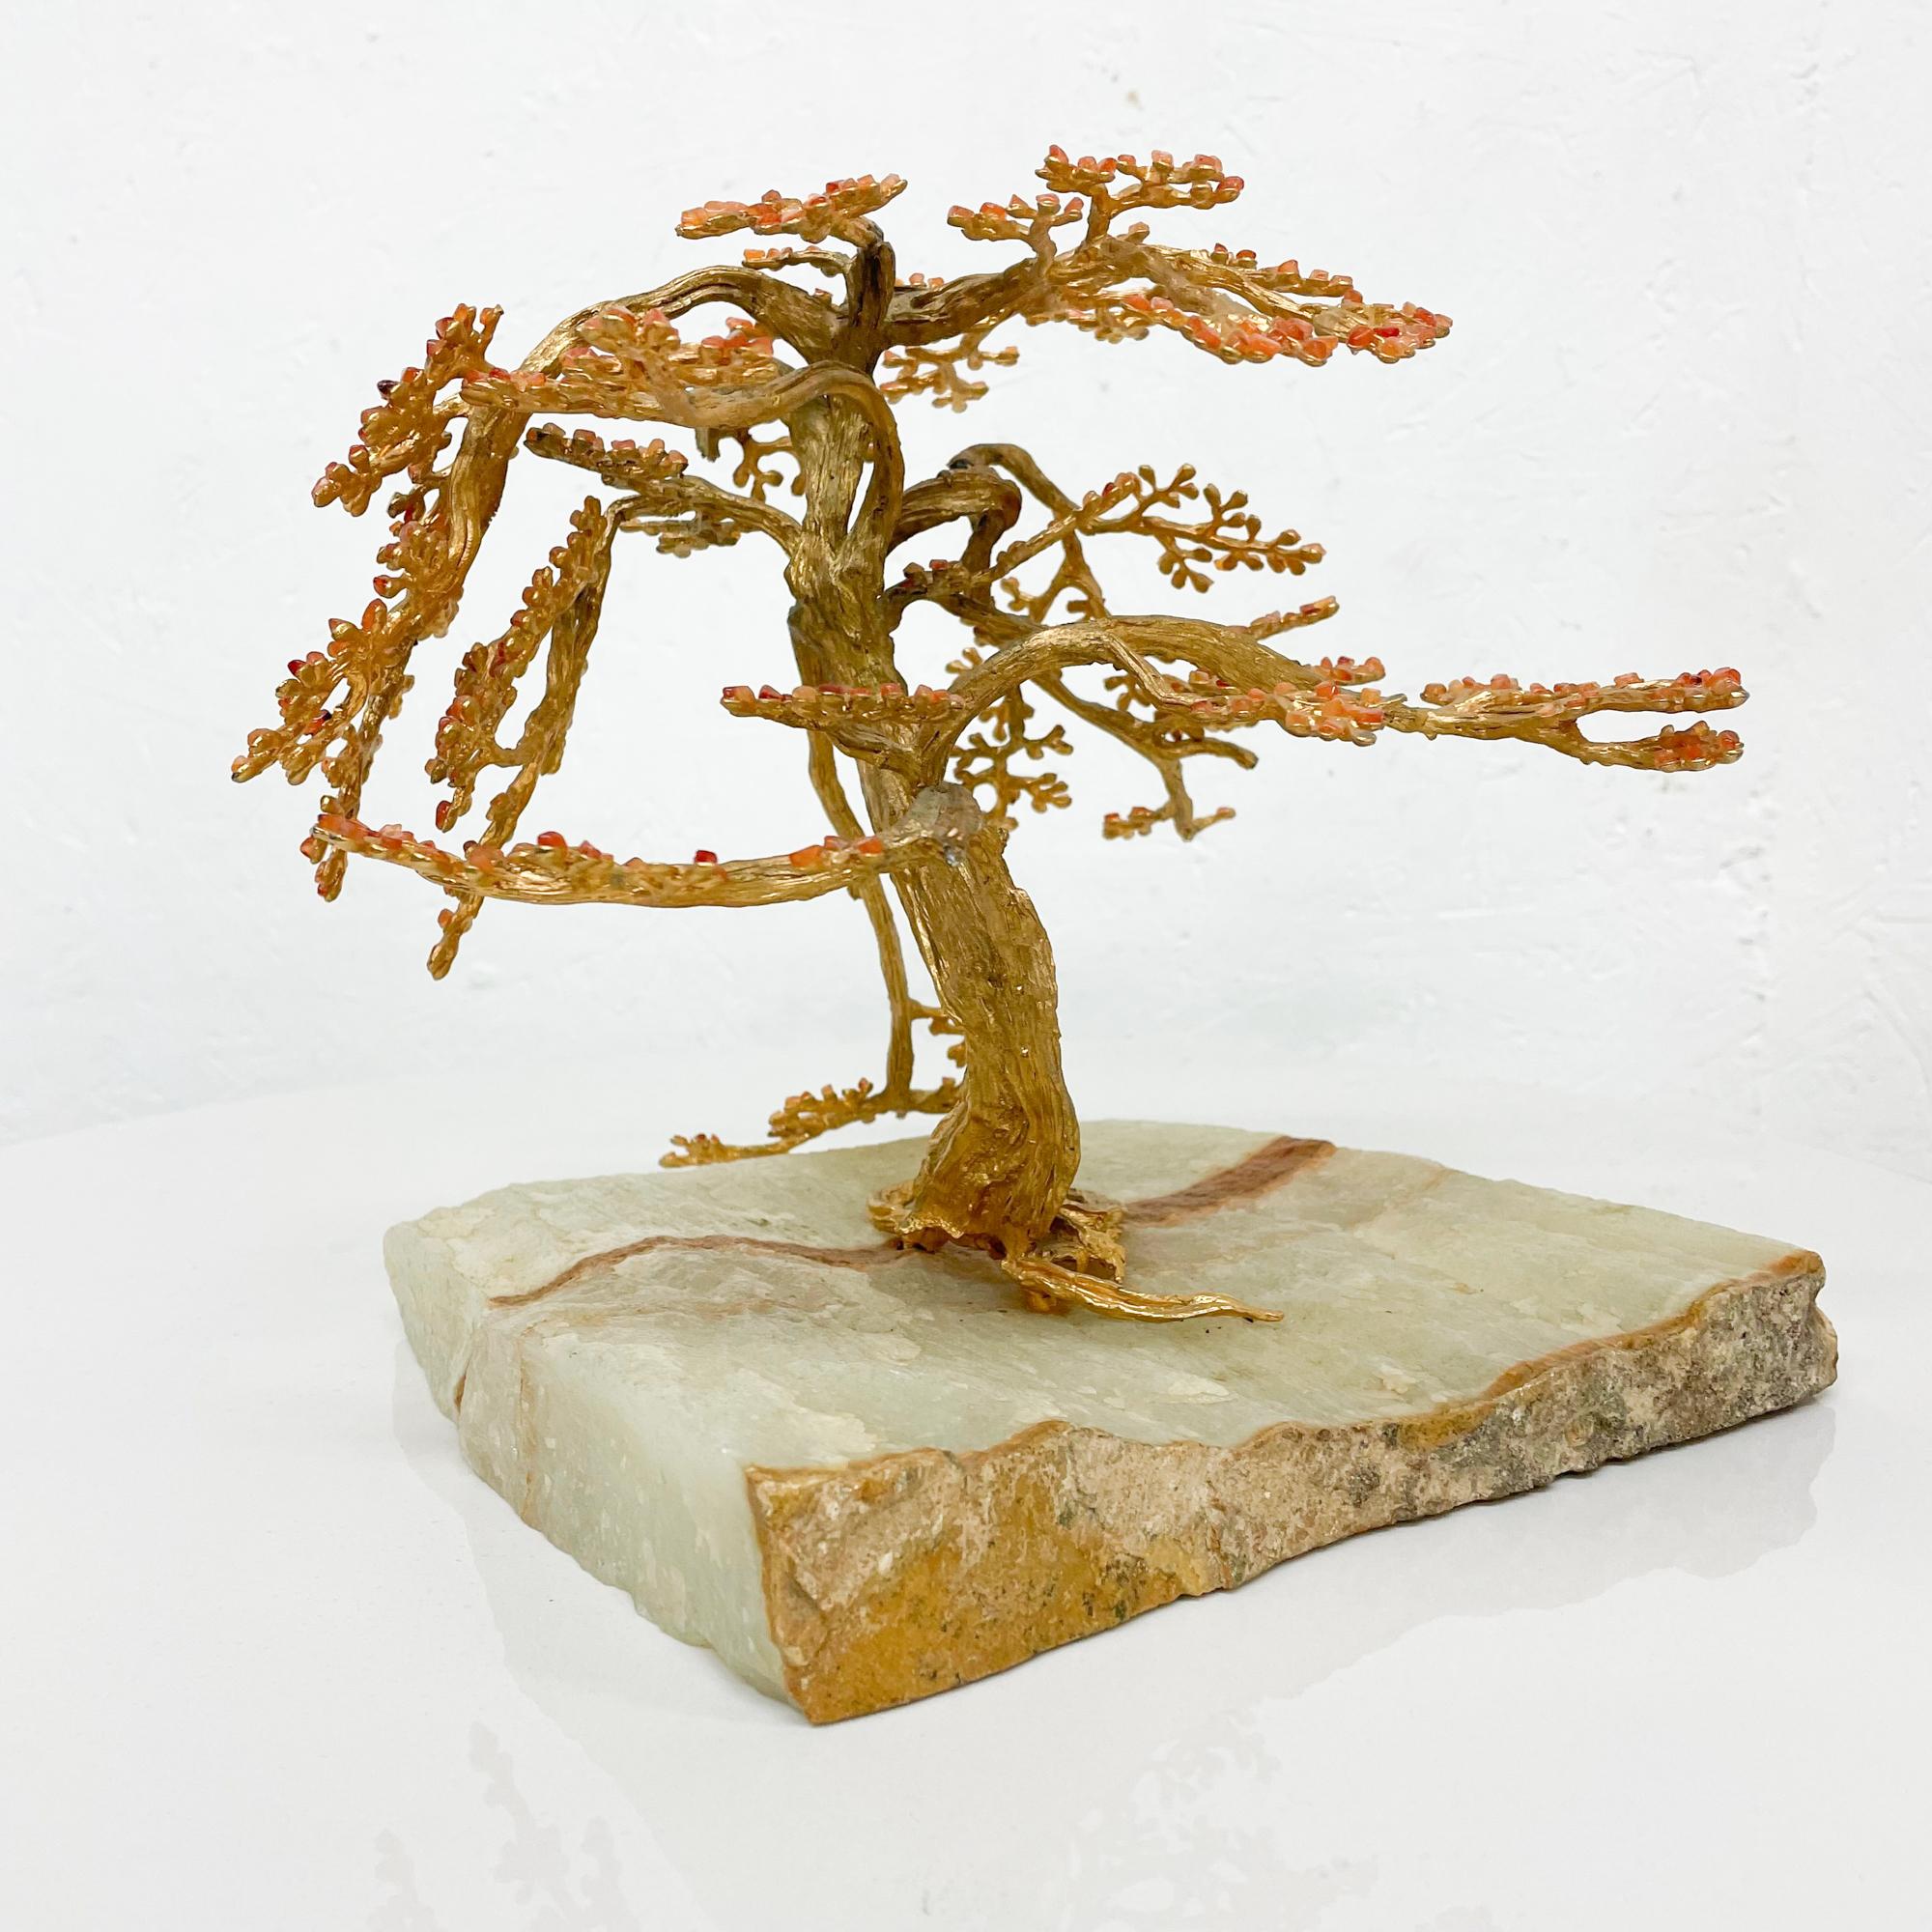 Art Sculpture
Sculptural modern Bonsai tree botanical art in quartzite stone and bronze
Exquisite light and airy elegant presentation
Beige and brown tones.
Measures: 8.75 W x 8.5 D x 8 H inches
Preowned unrestored original vintage condition.
Refer